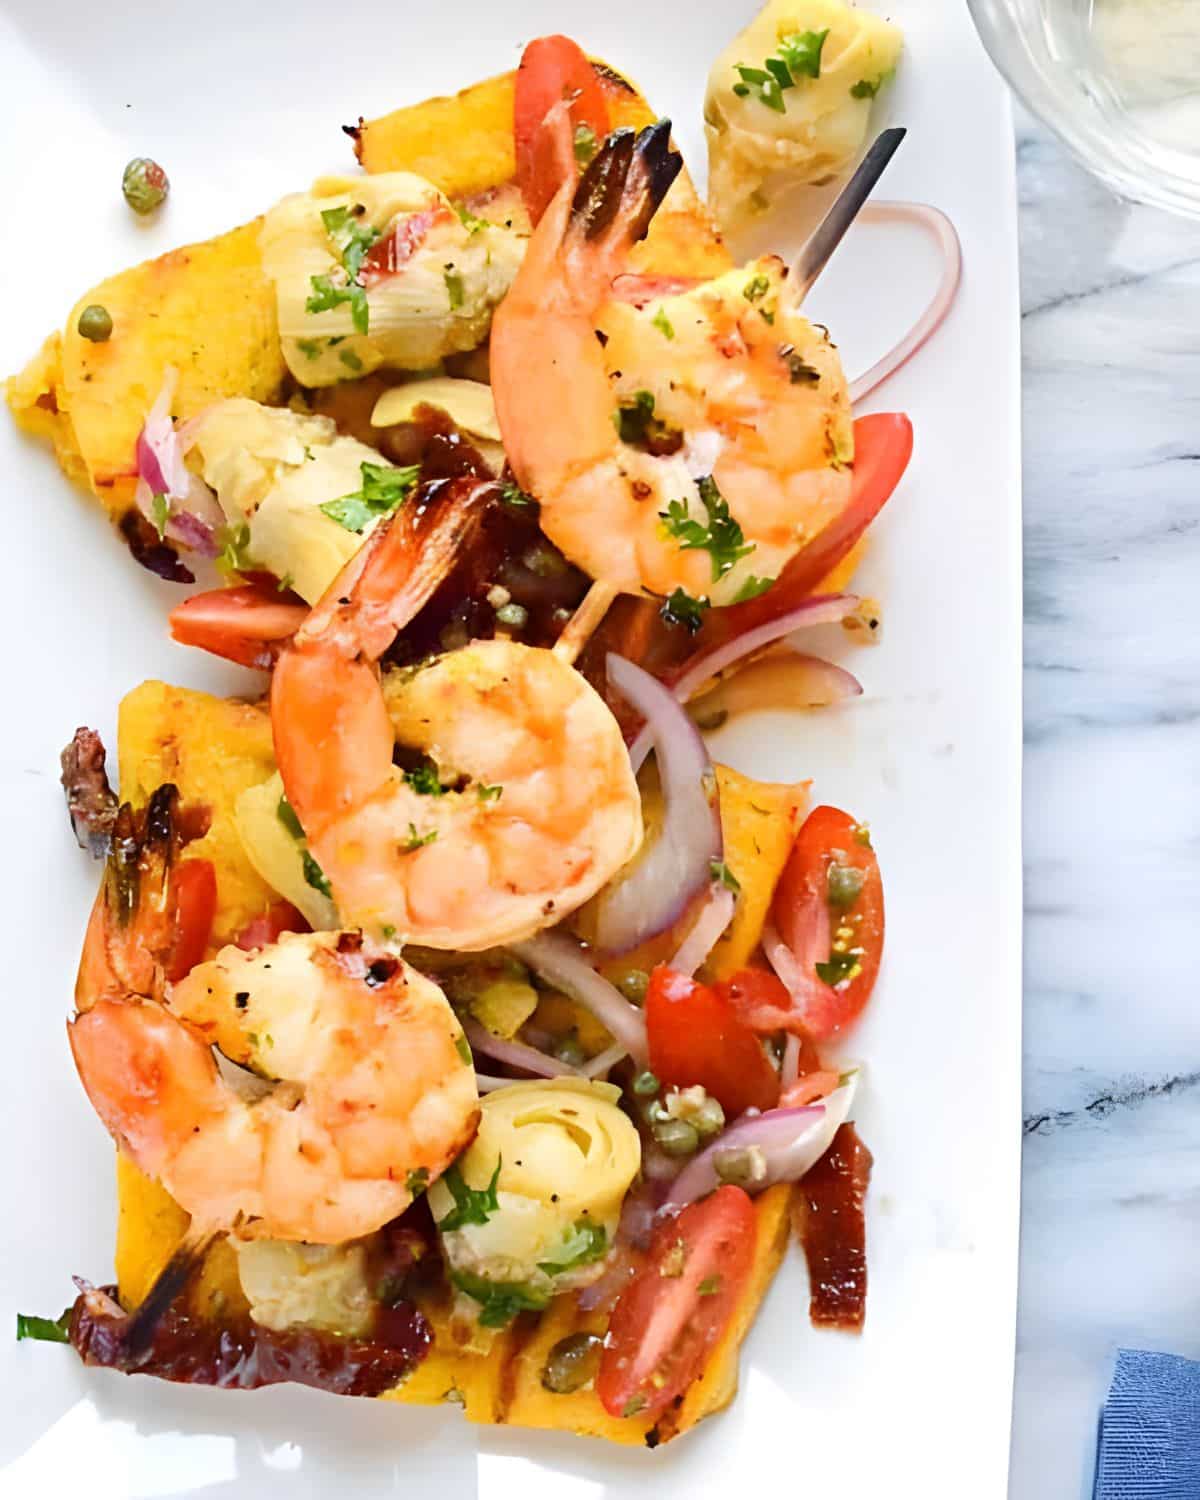 Grilled Shrimp and Polenta with artichokes.